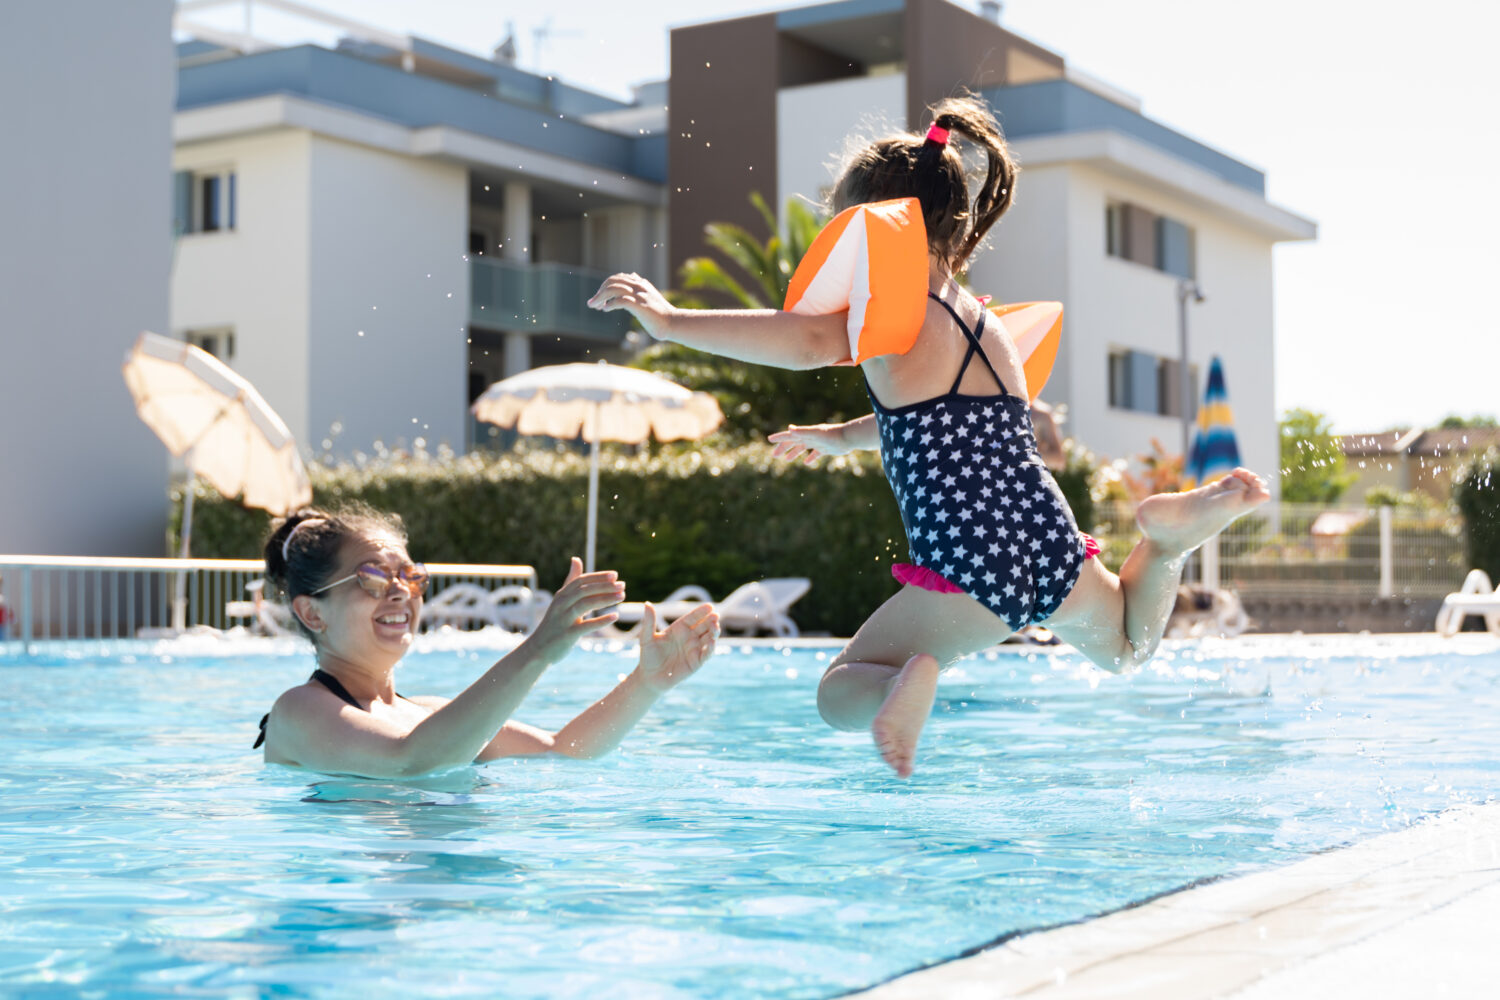 child jumping into a pool wearing floaties, and their mom waiting with open arms